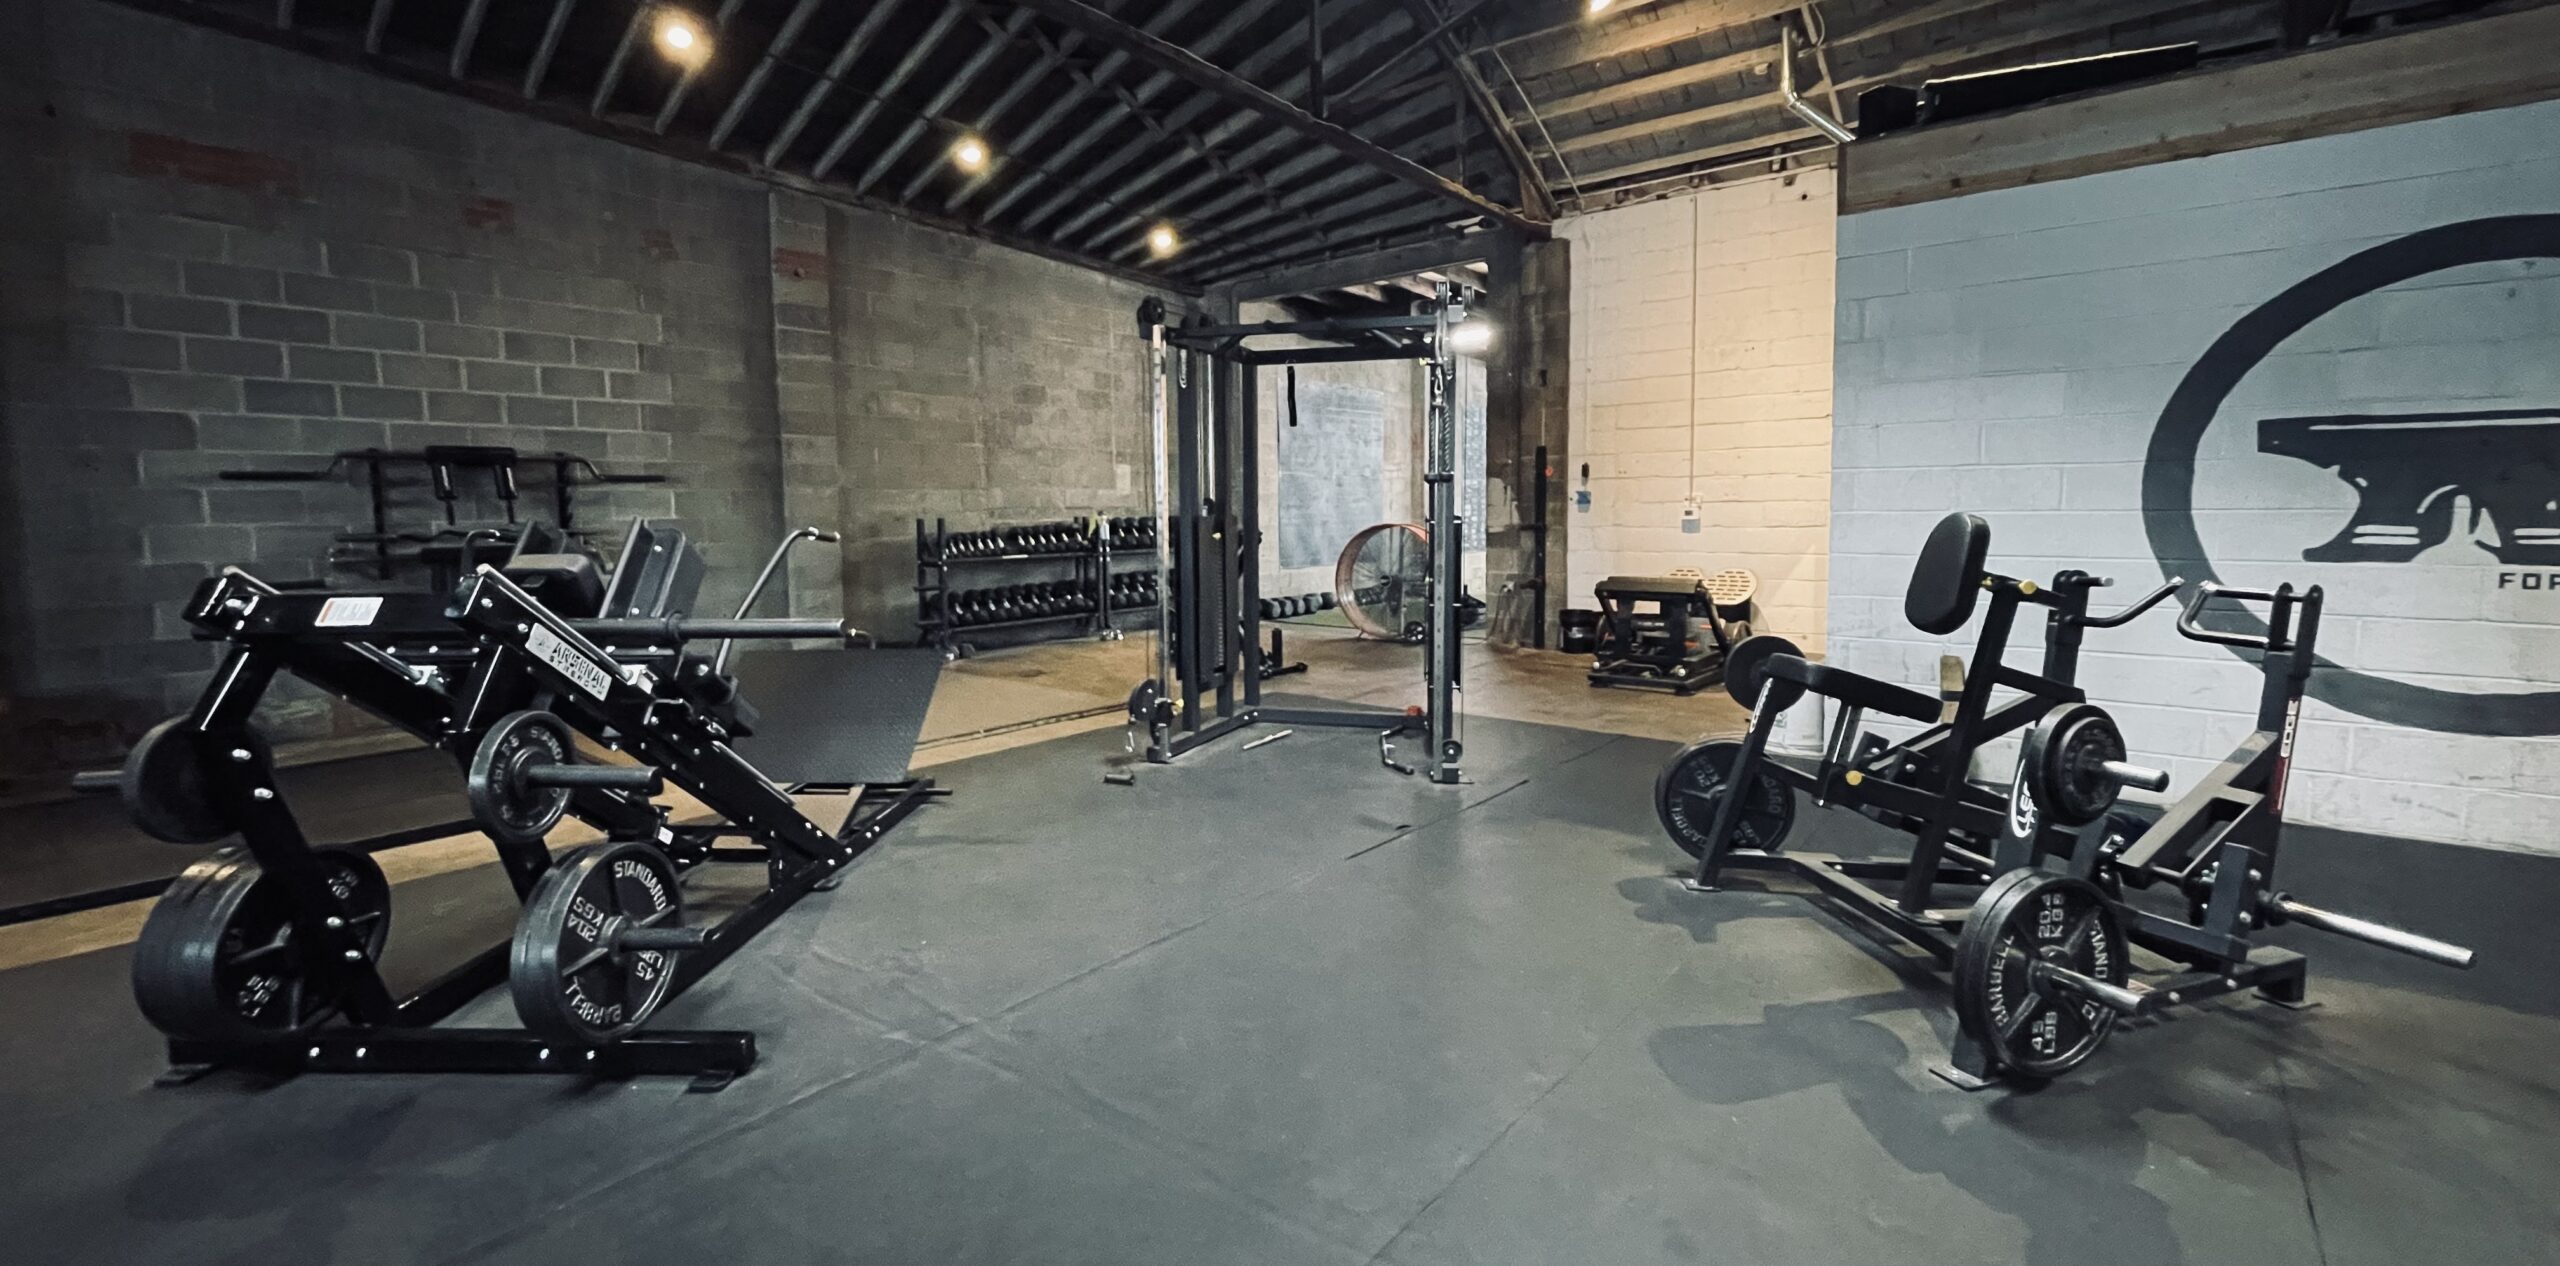 A picture of forge fitness studio gym with a lot of equipment in it